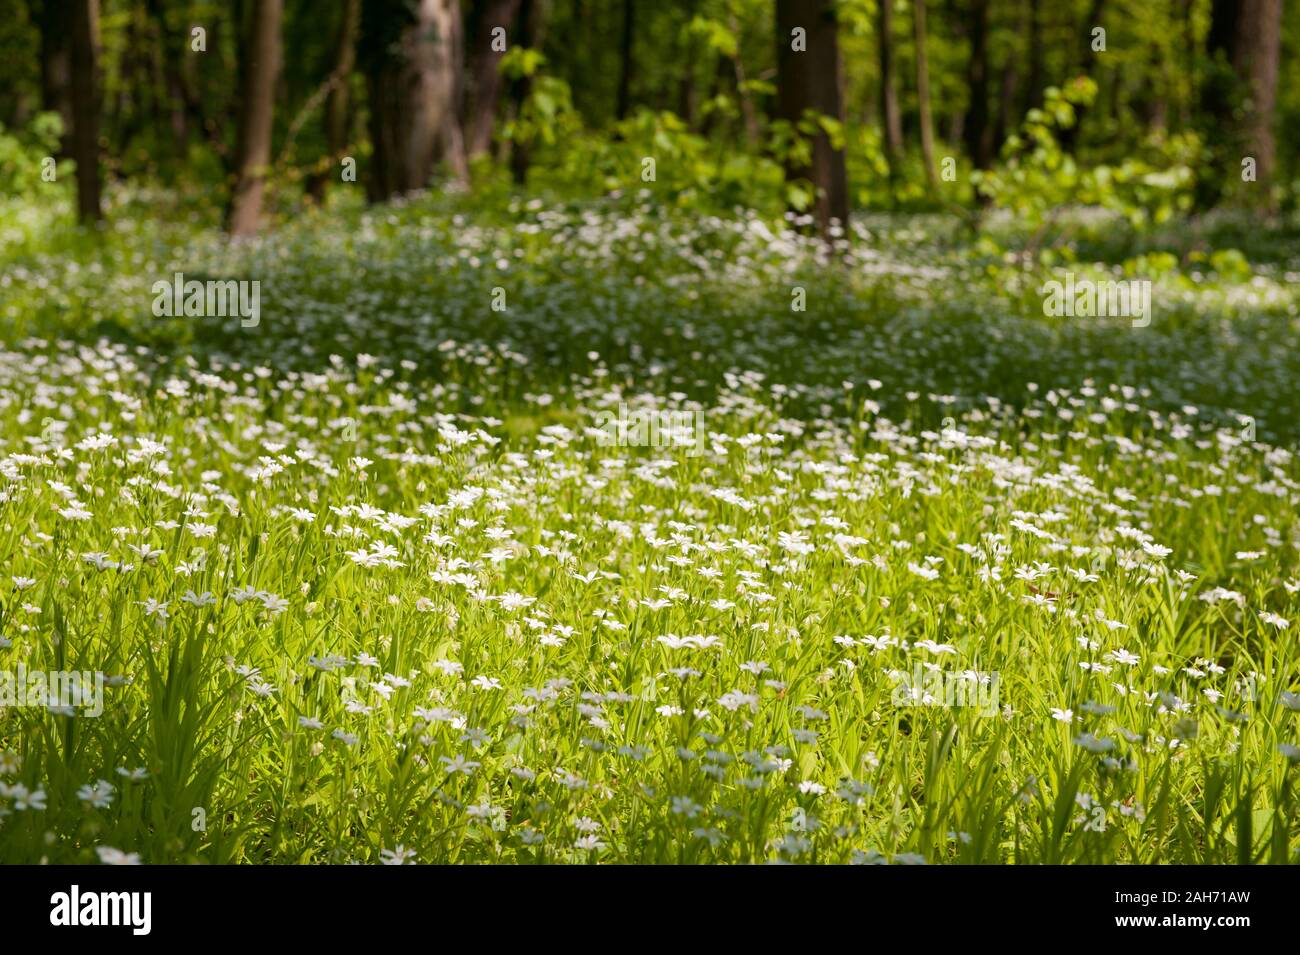 Springtime blooming plants in morning sunlight, young woods natural view with trees and white flowers growing as the ground cover. Rights managed. Stock Photo